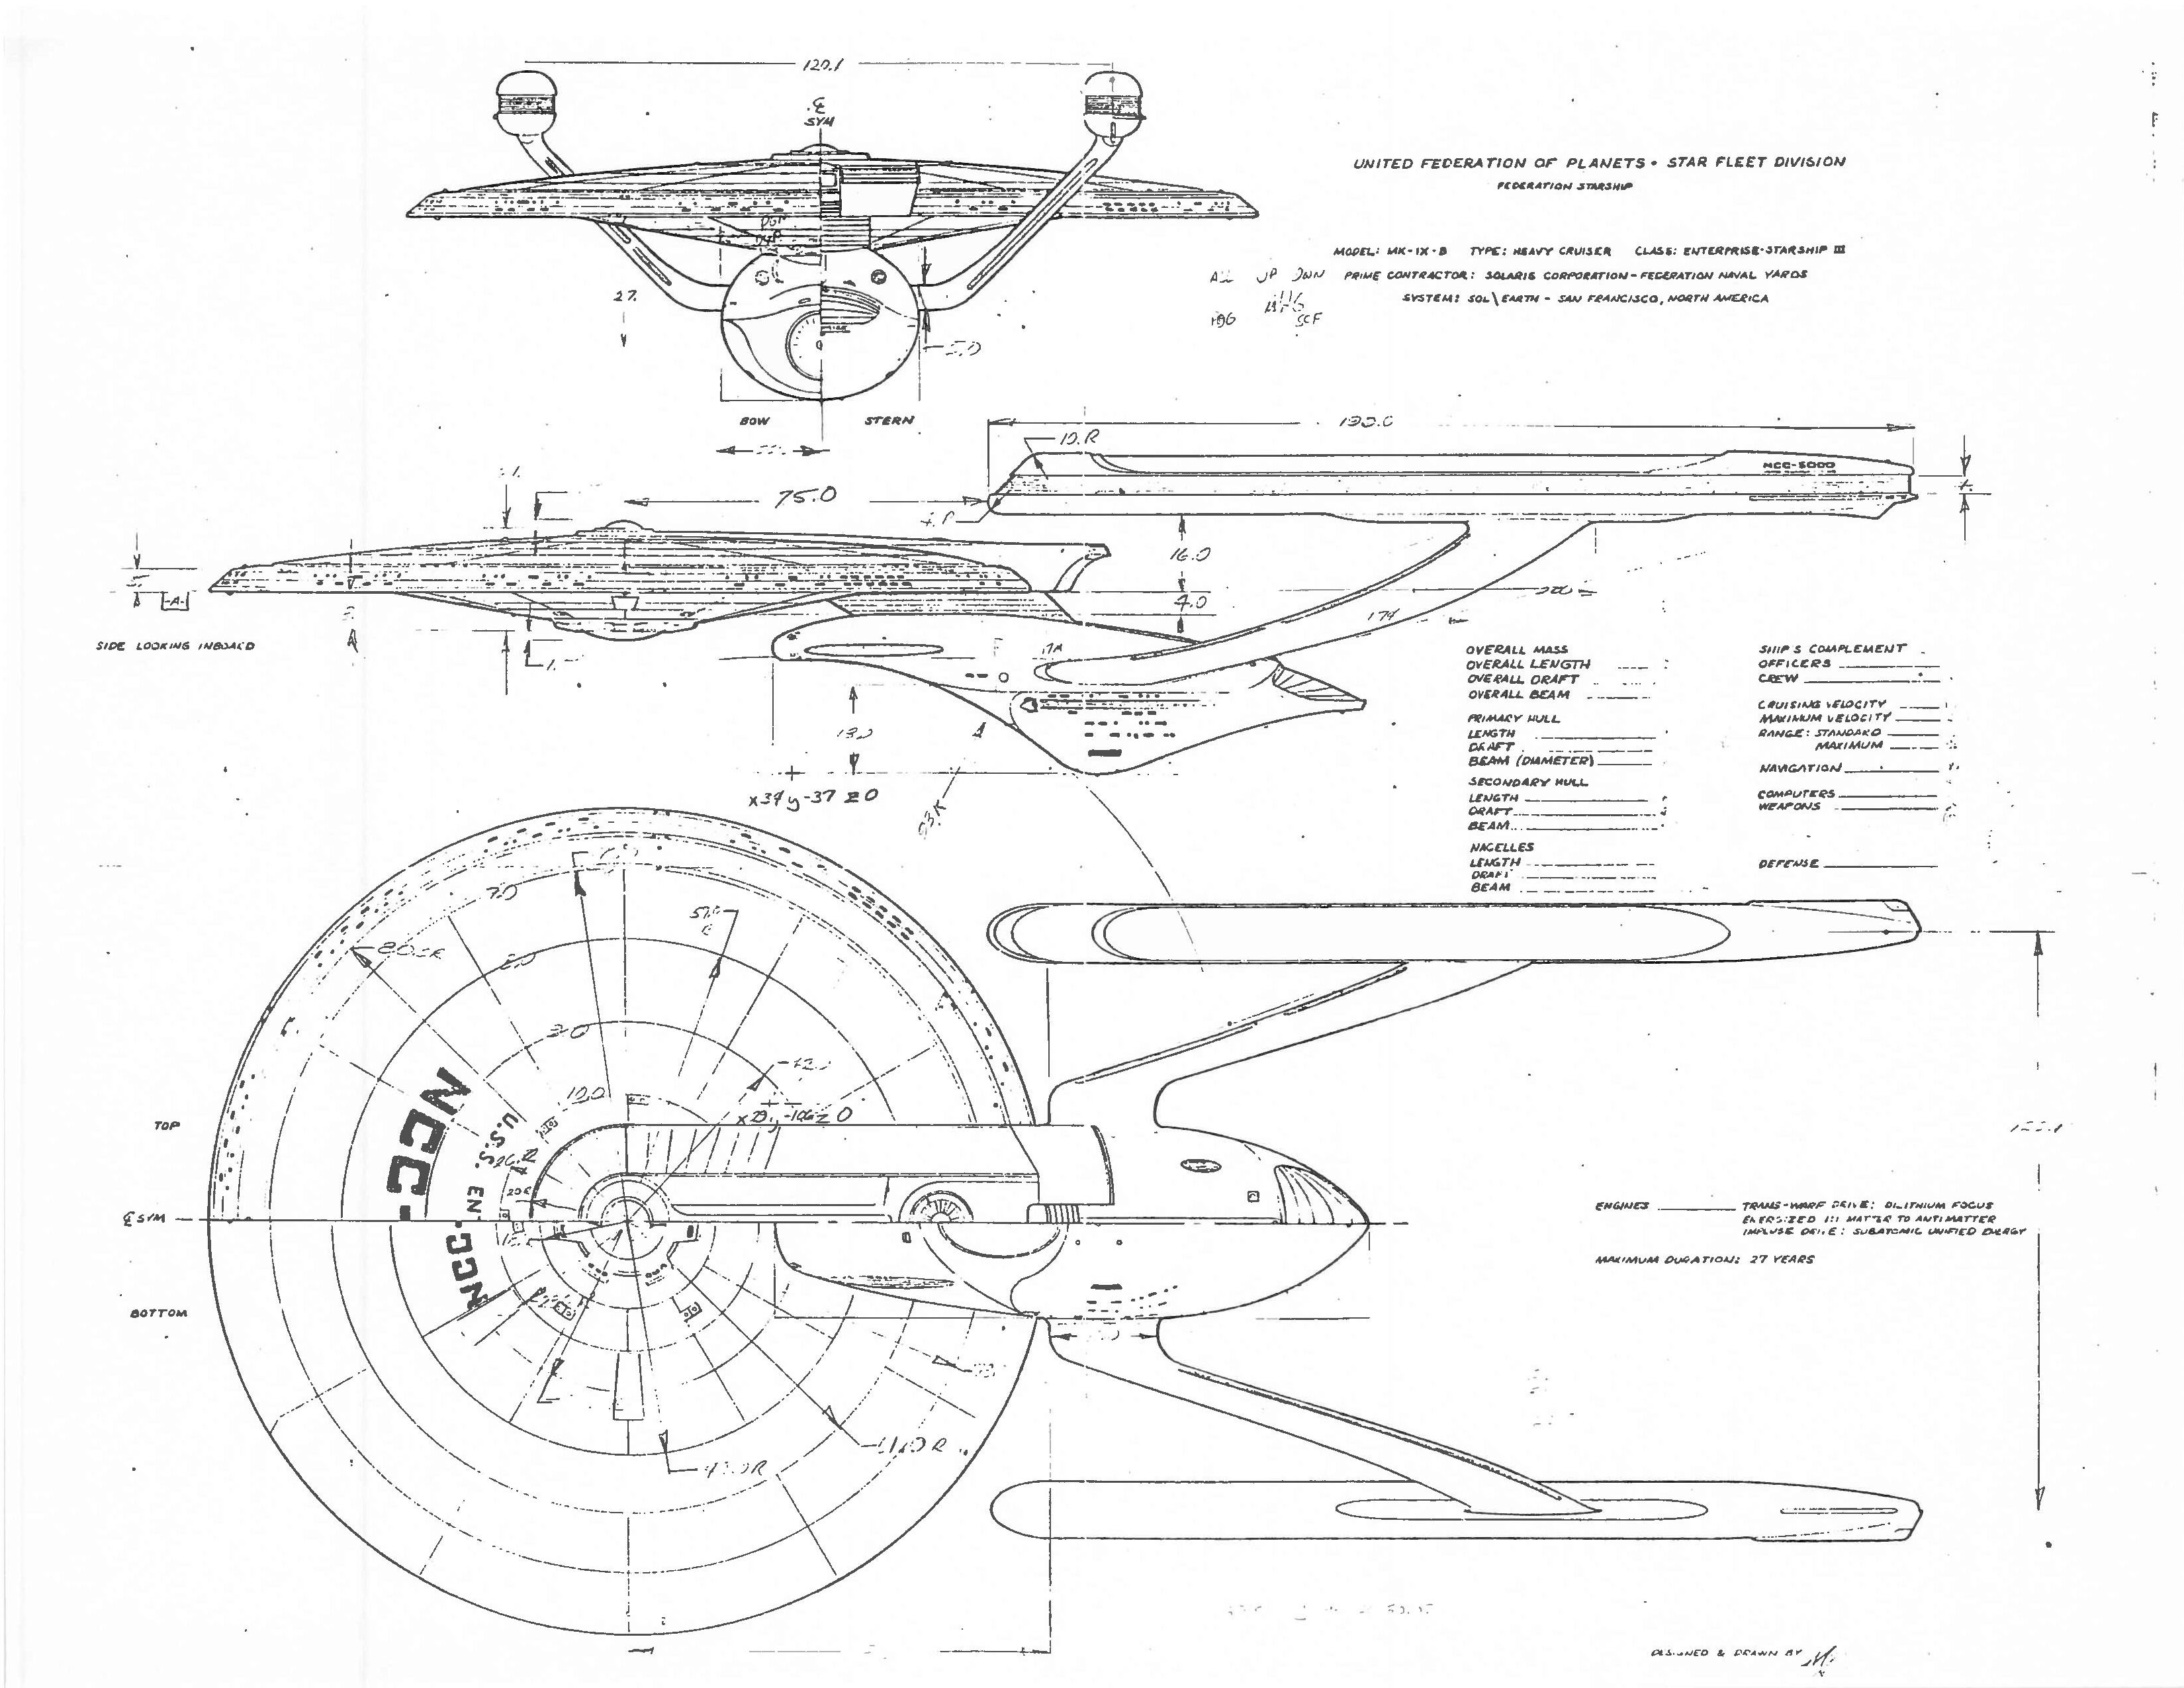 NX-1701-A: The Enterprise That Never Was Technical Manual